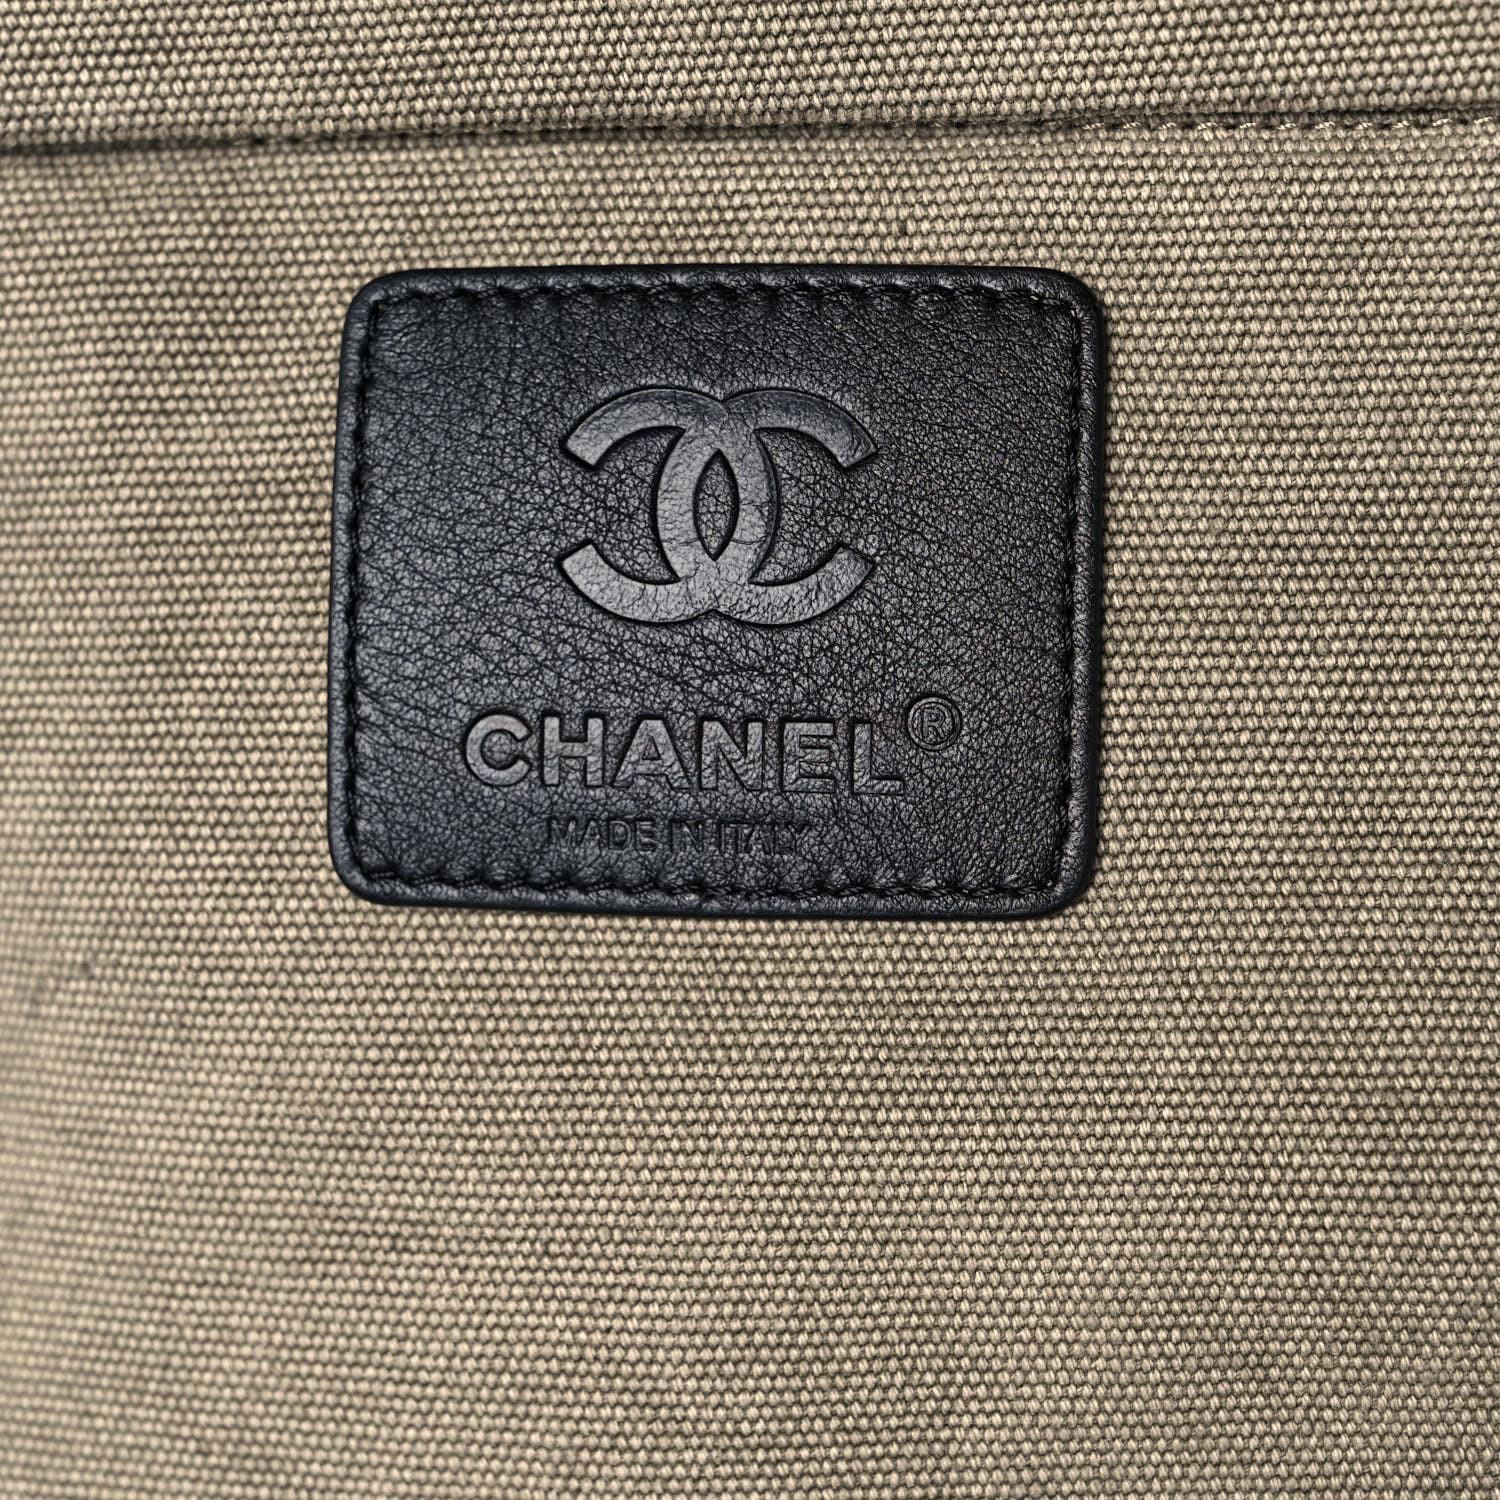 Chanel 2016 Coco Cocoon Carry Suitcase On Trolley Travel Beige Luggage Bag For Sale 4